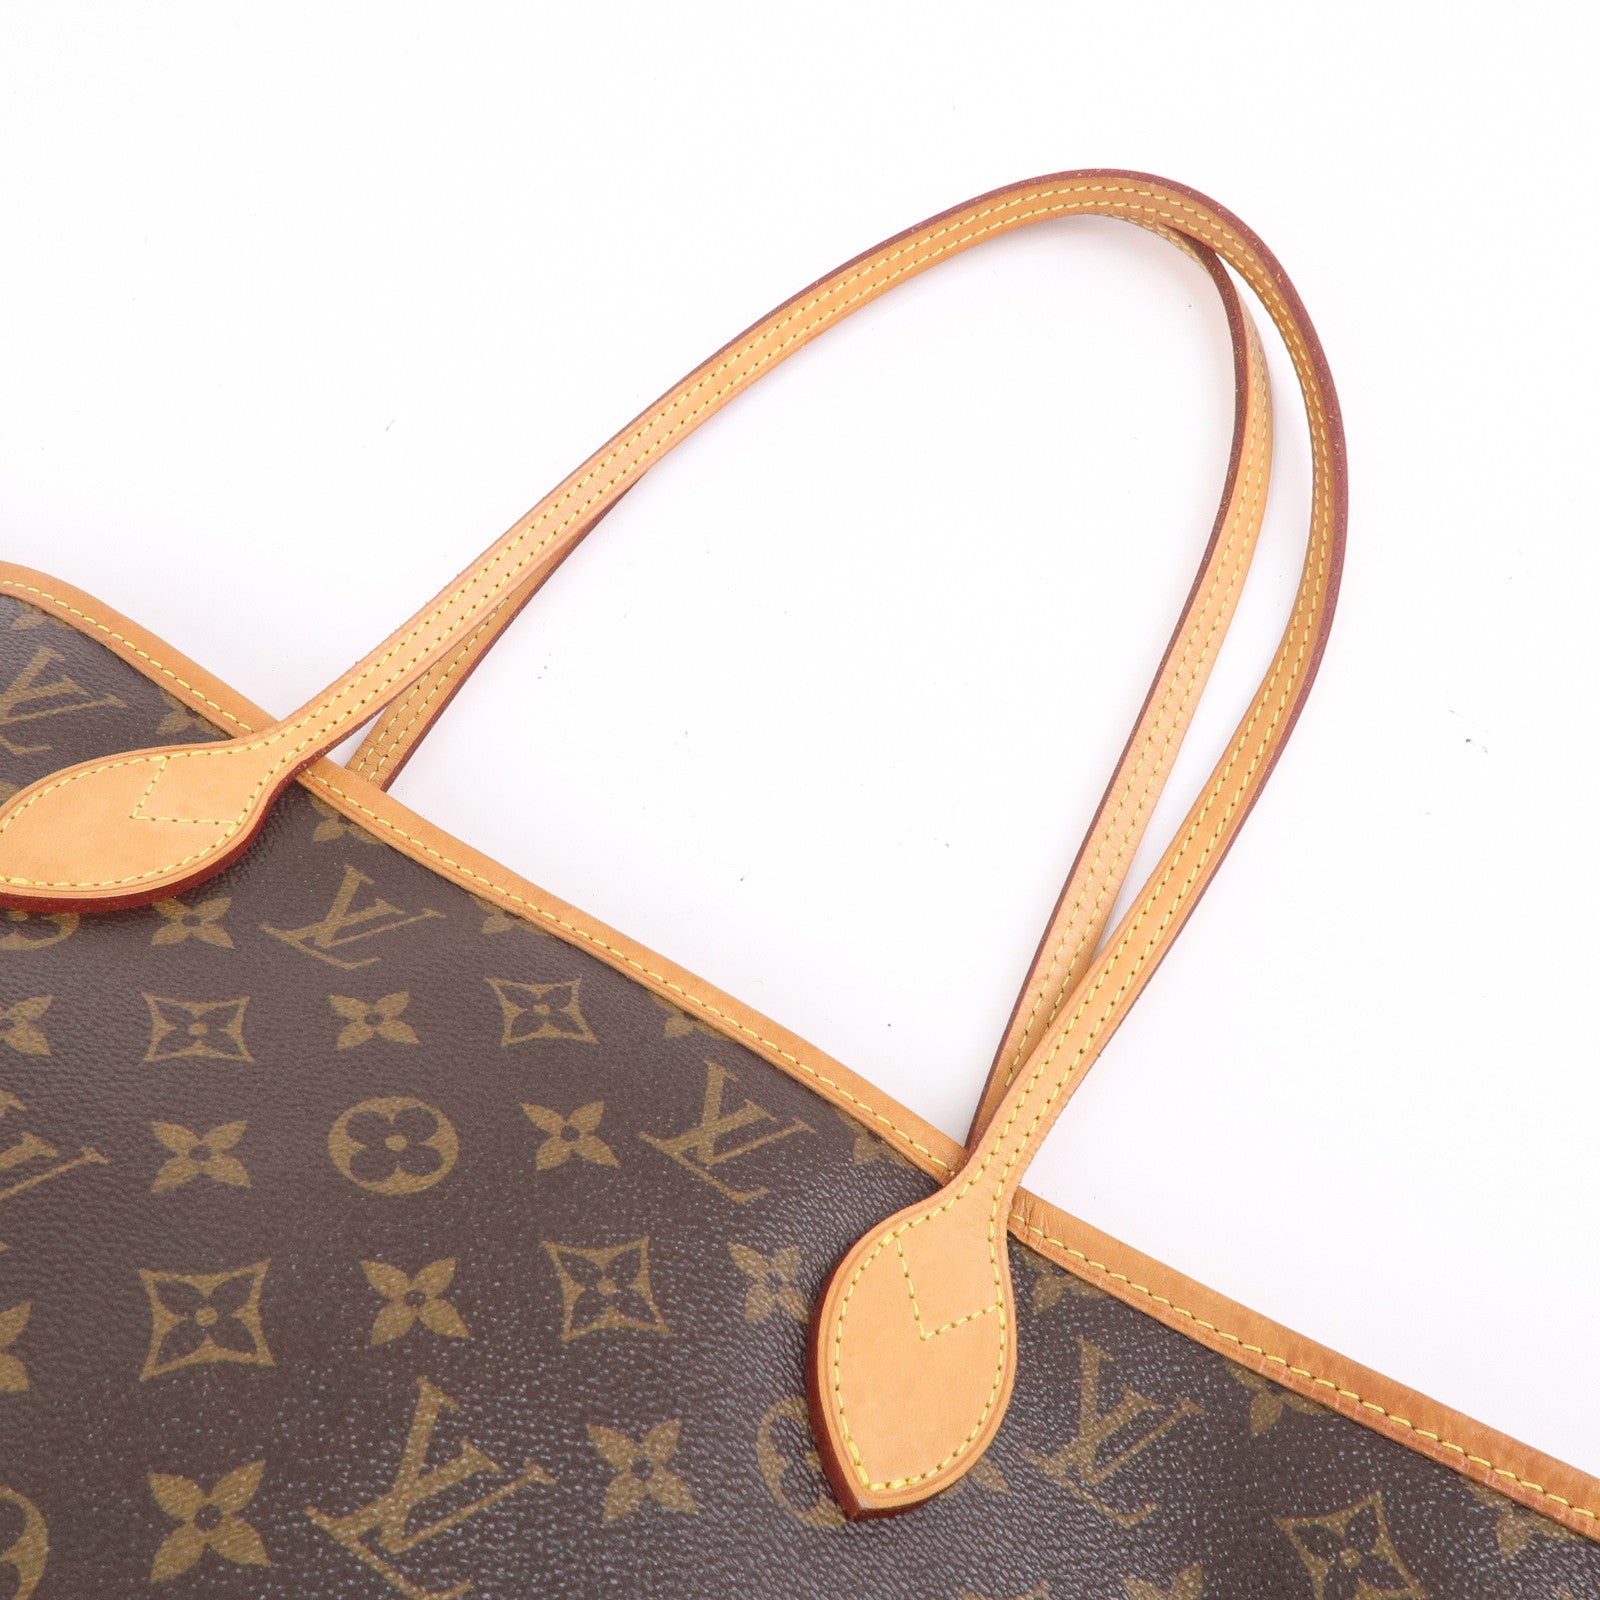 Louis Vuitton Monogram Neverfull GM Tote with Cerise Red Interior